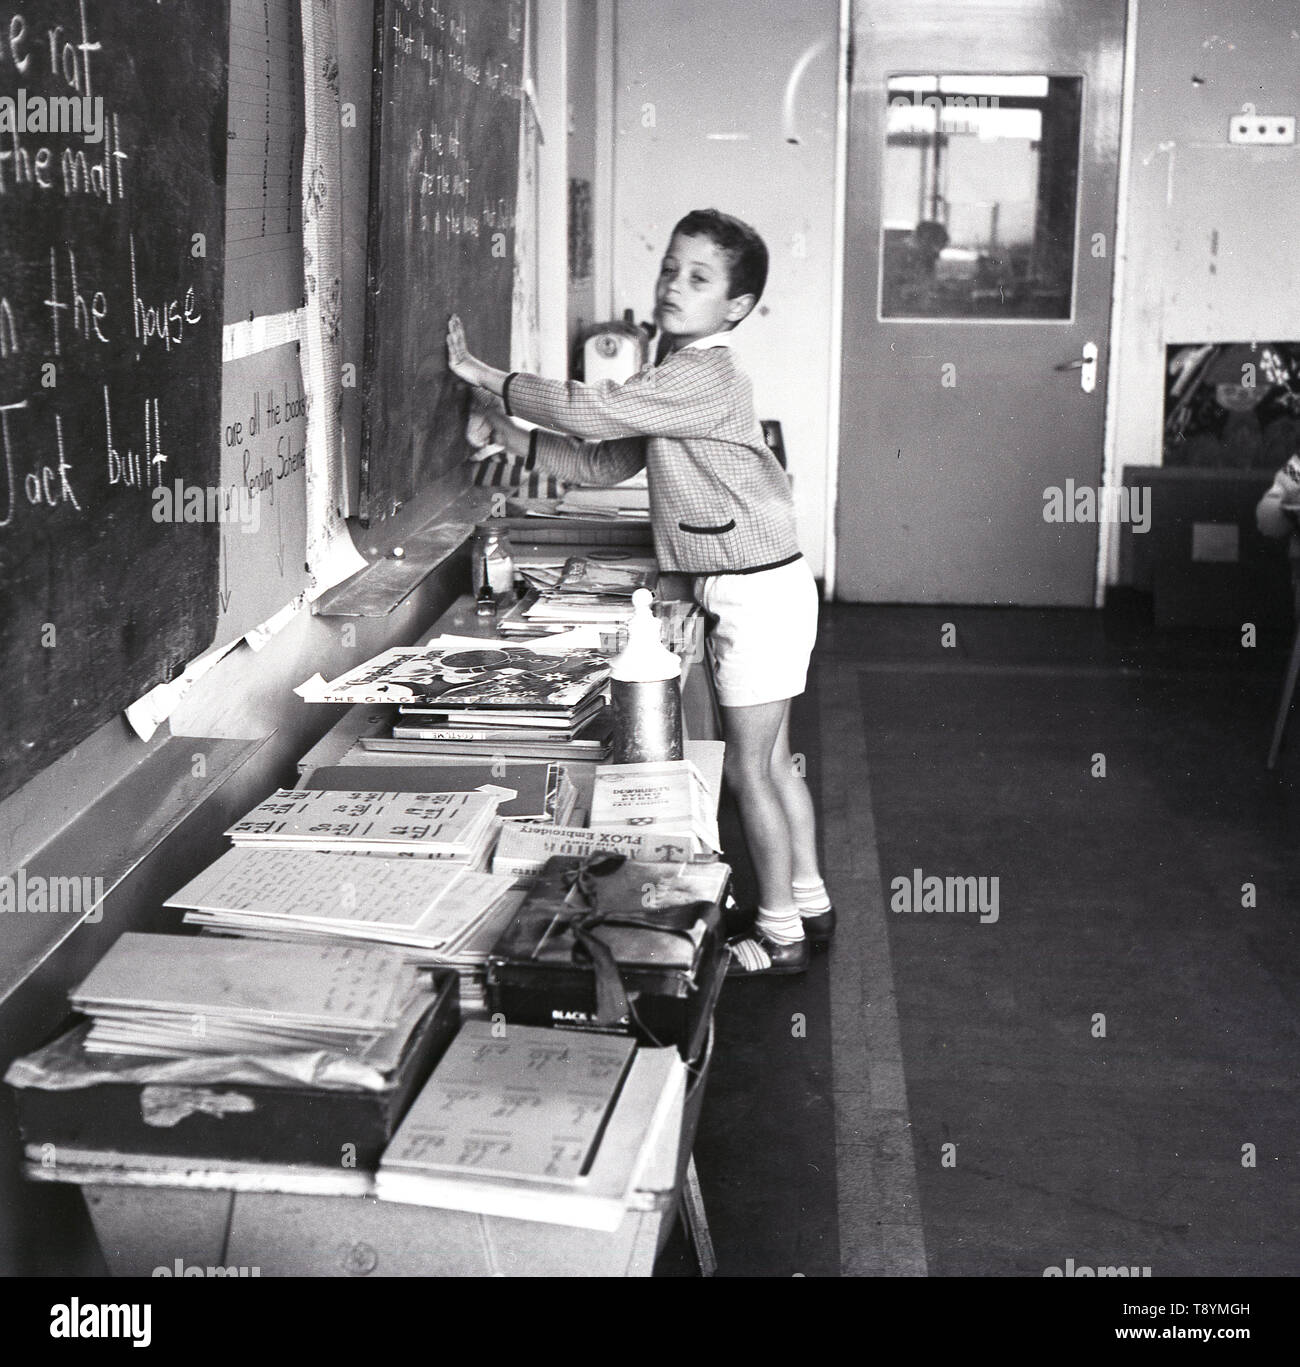 1960s, historical, young schoolboy wiping the chalk writing off blackboard in side a school classroom, England, UK. Stock Photo